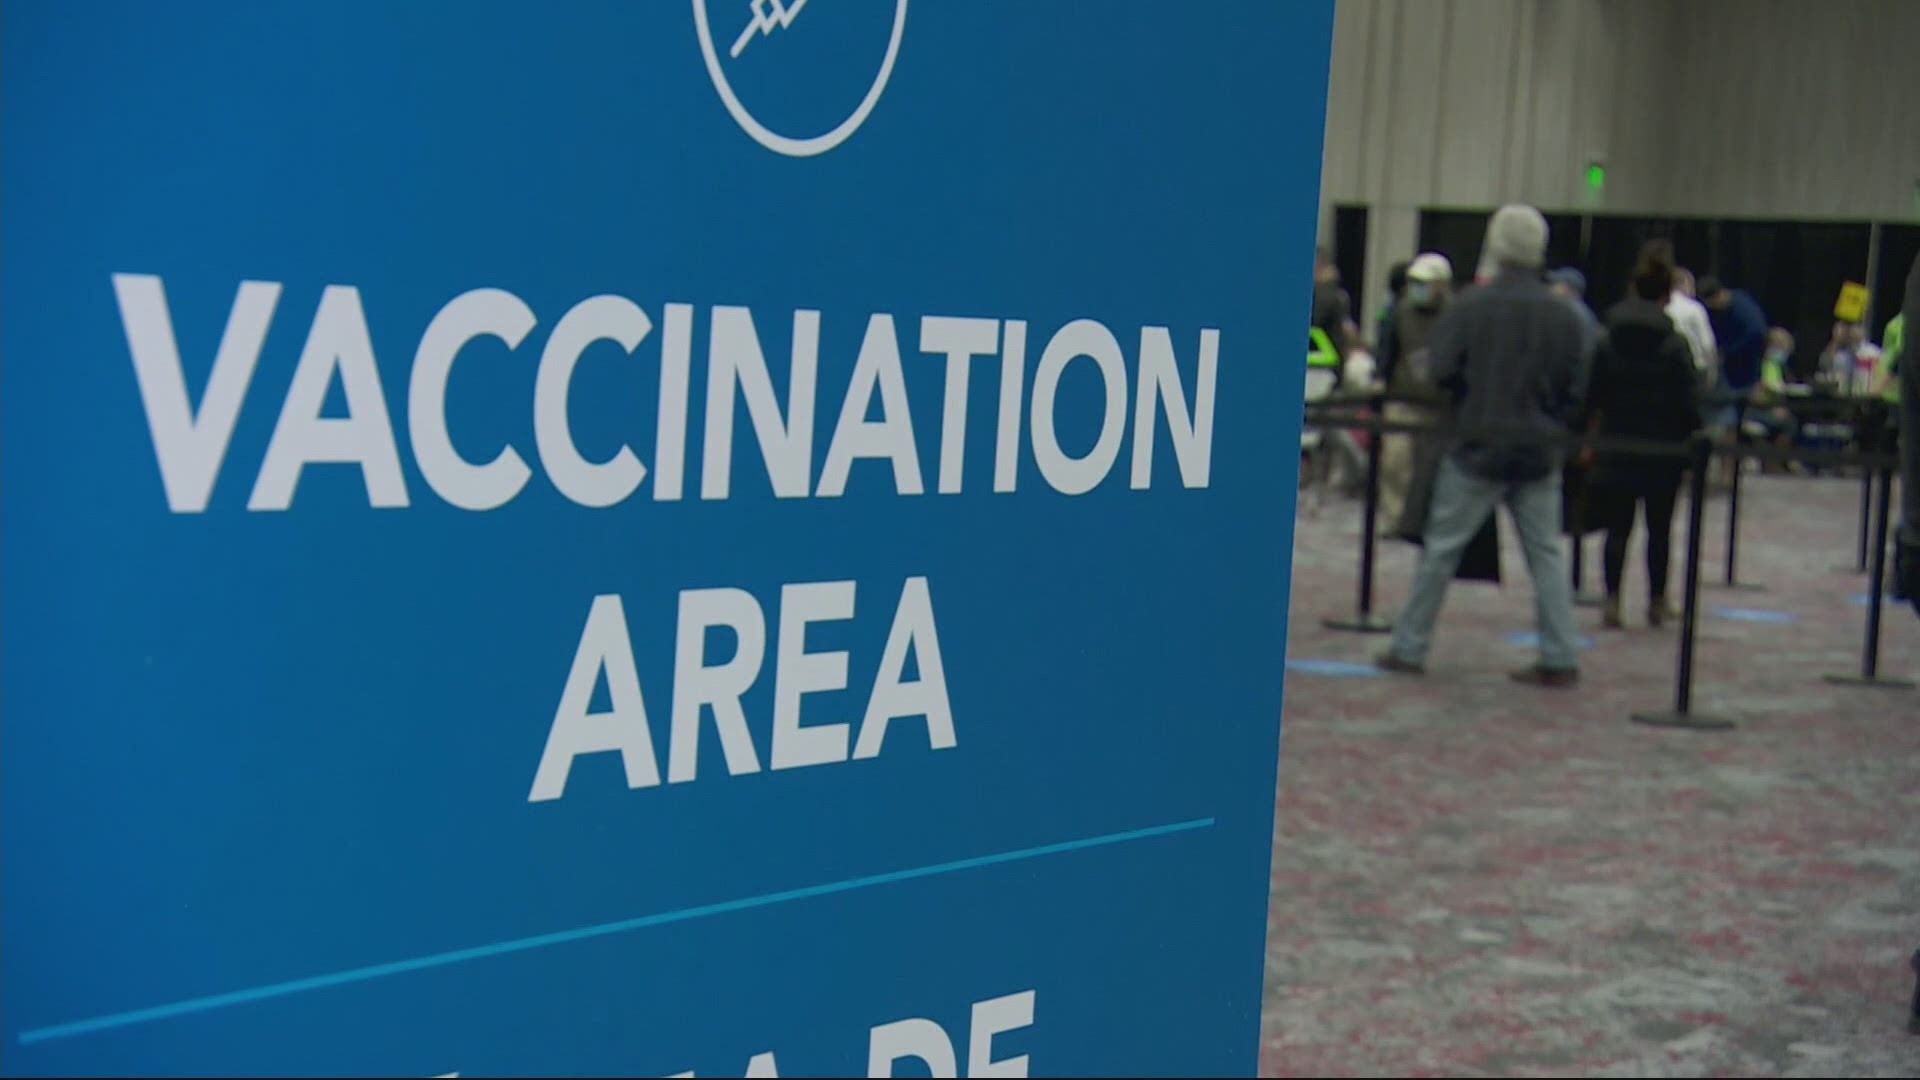 Remember when there was so much frustration trying to get a vaccine? The tide has turned. As Tim Gordon reports, in some cases supply is outpacing demand.